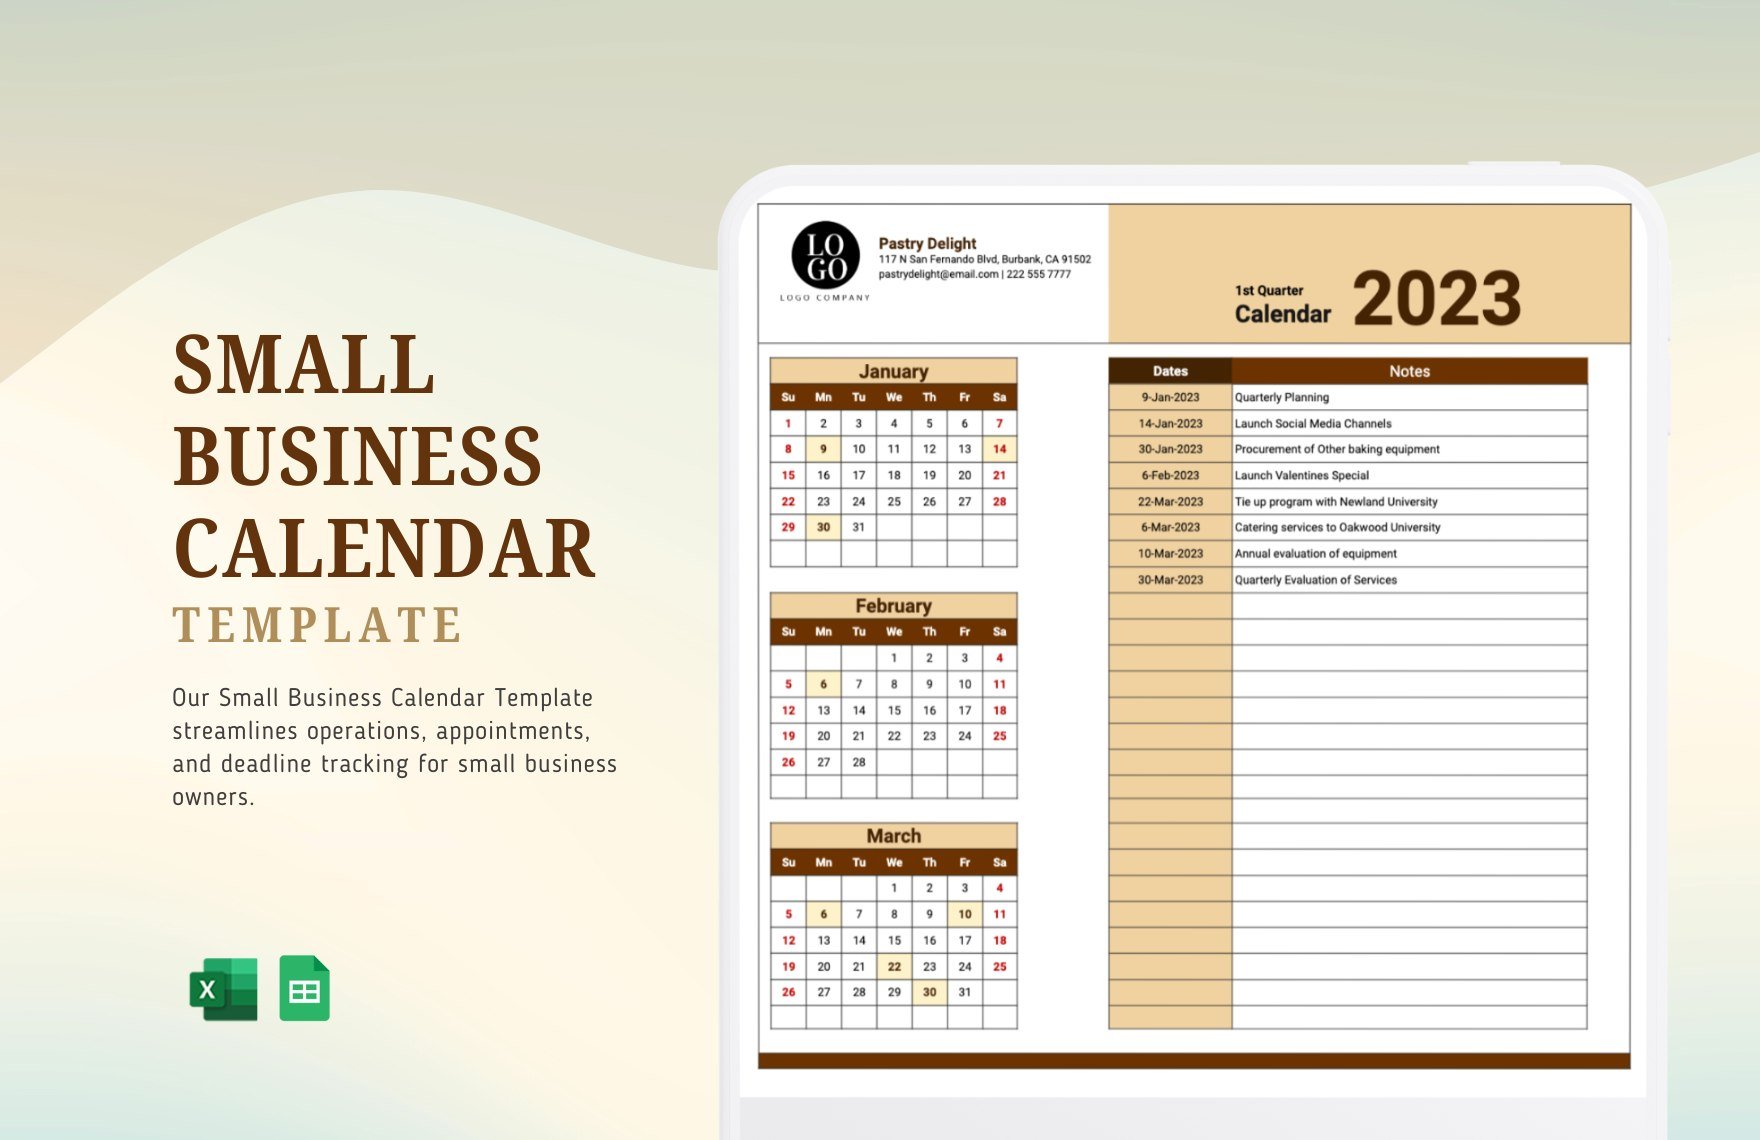 Small Business Calendar Template in Excel, Google Sheets